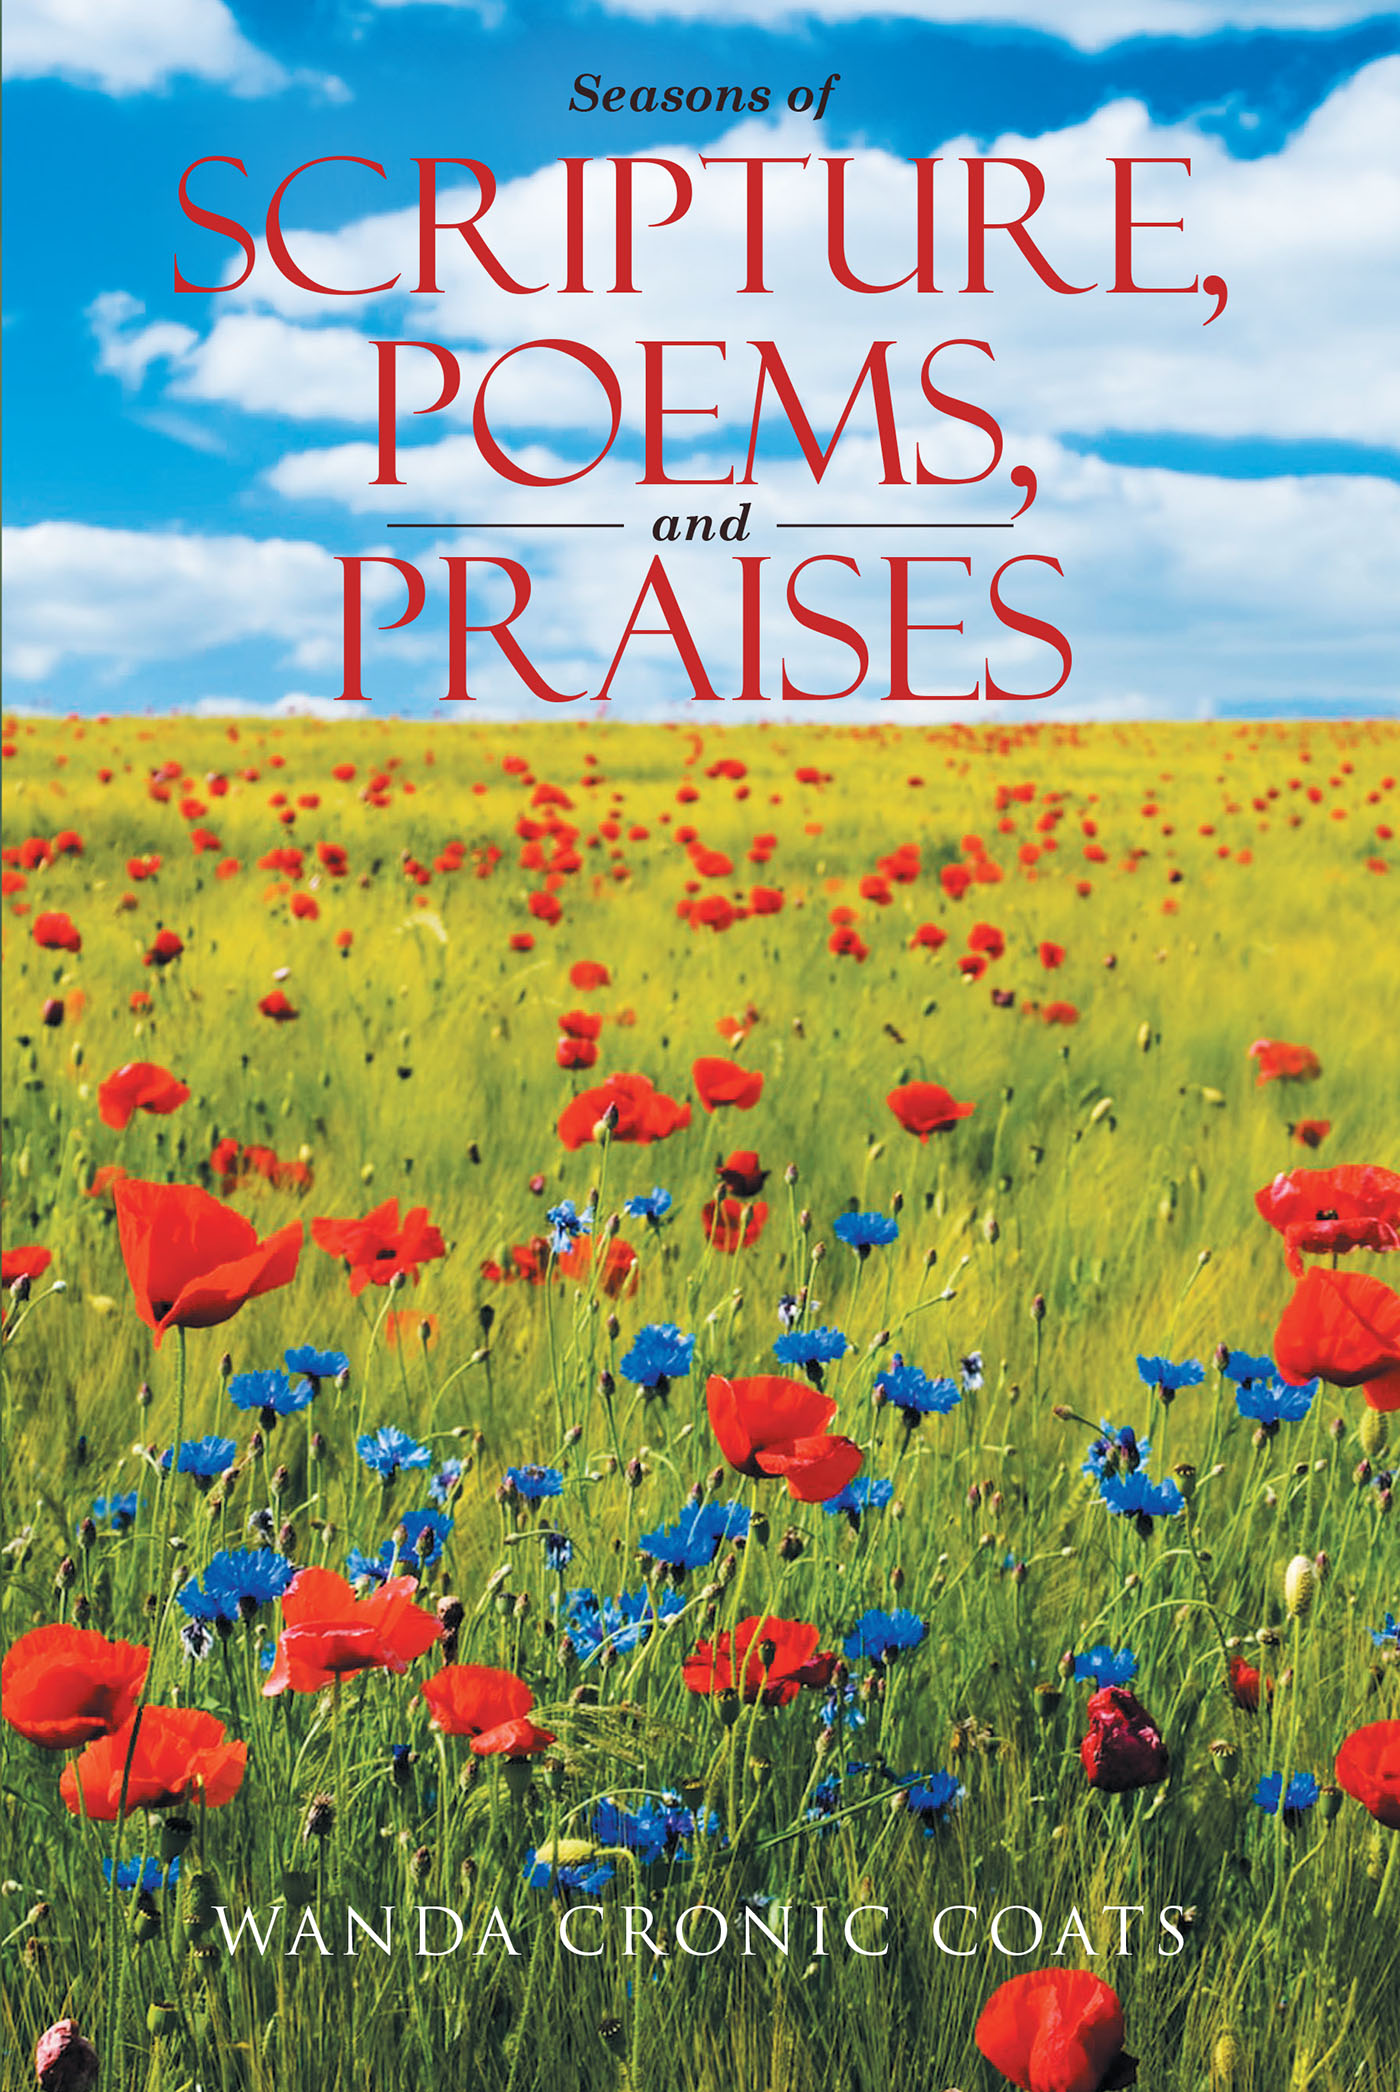 Author Wanda Cronic Coats’s New Book, "Seasons of Scripture, Poems, and Praises," is a Powerful Collection of Faith-Based Poems and Accompanying Biblical Passages